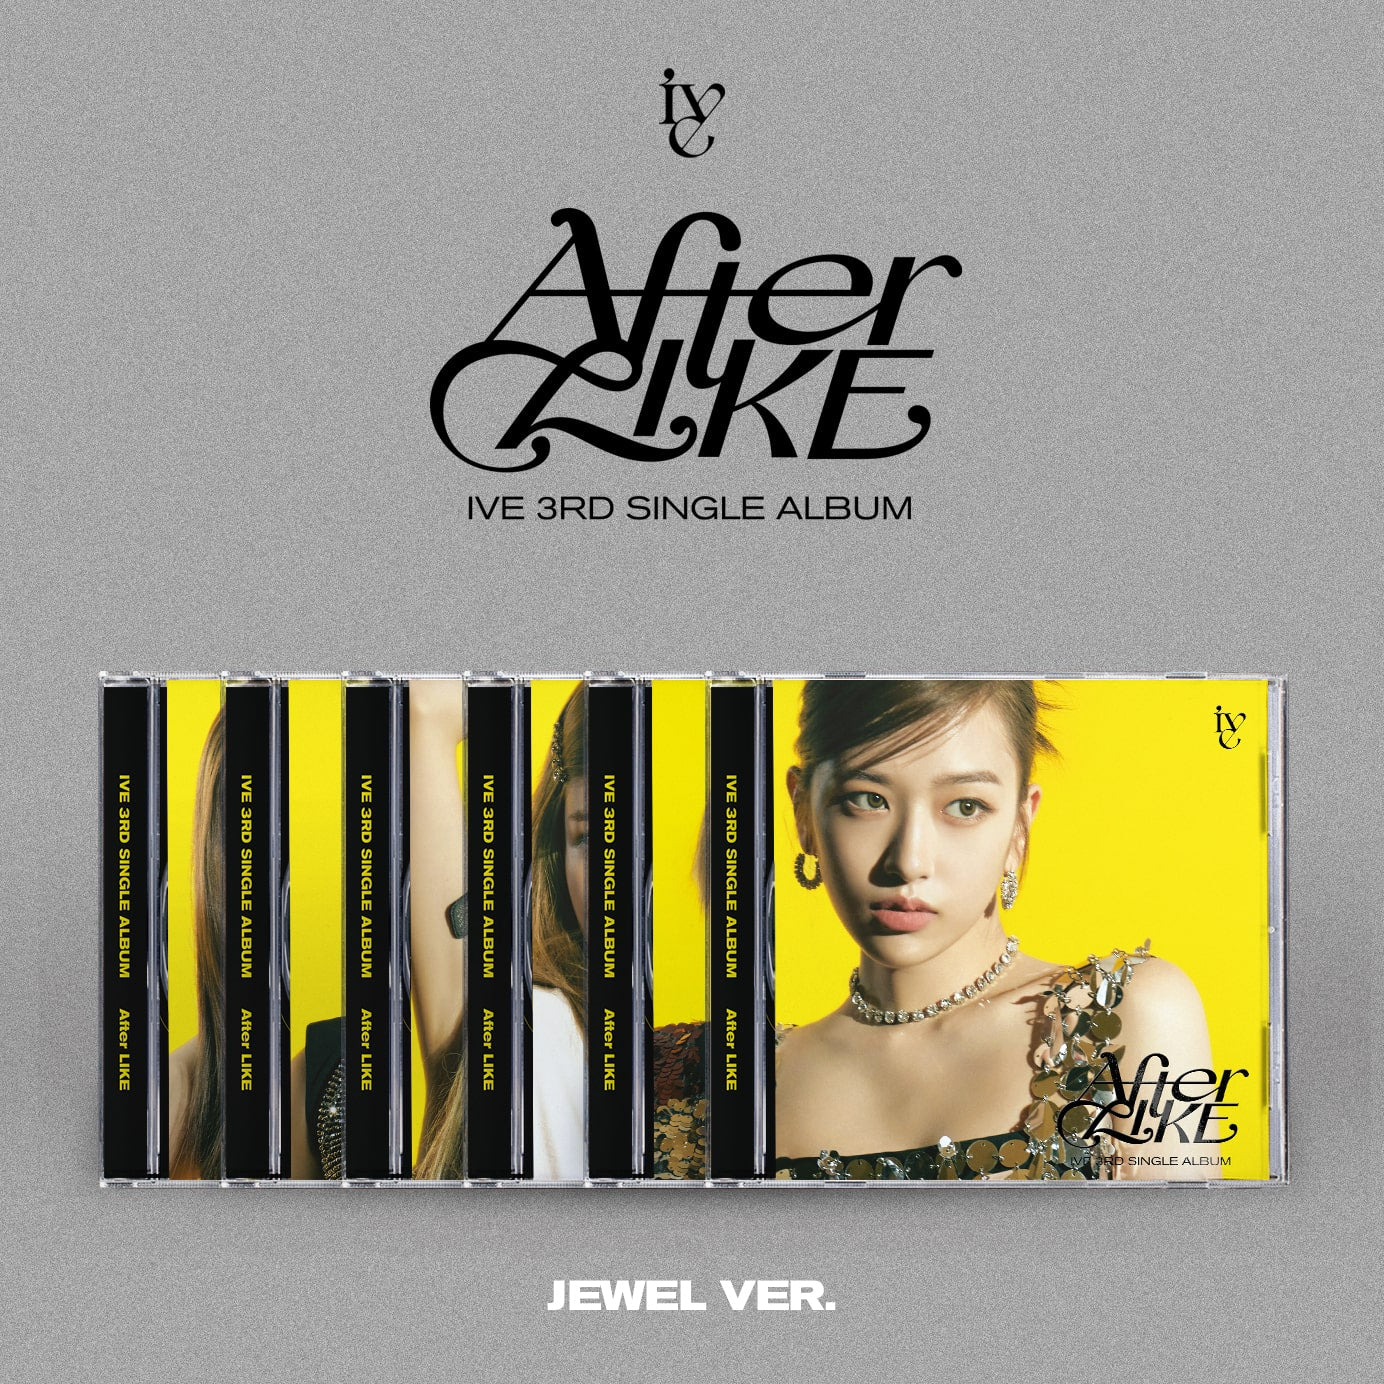 IVE - After Like (Jewel Ver.) Limited Edition